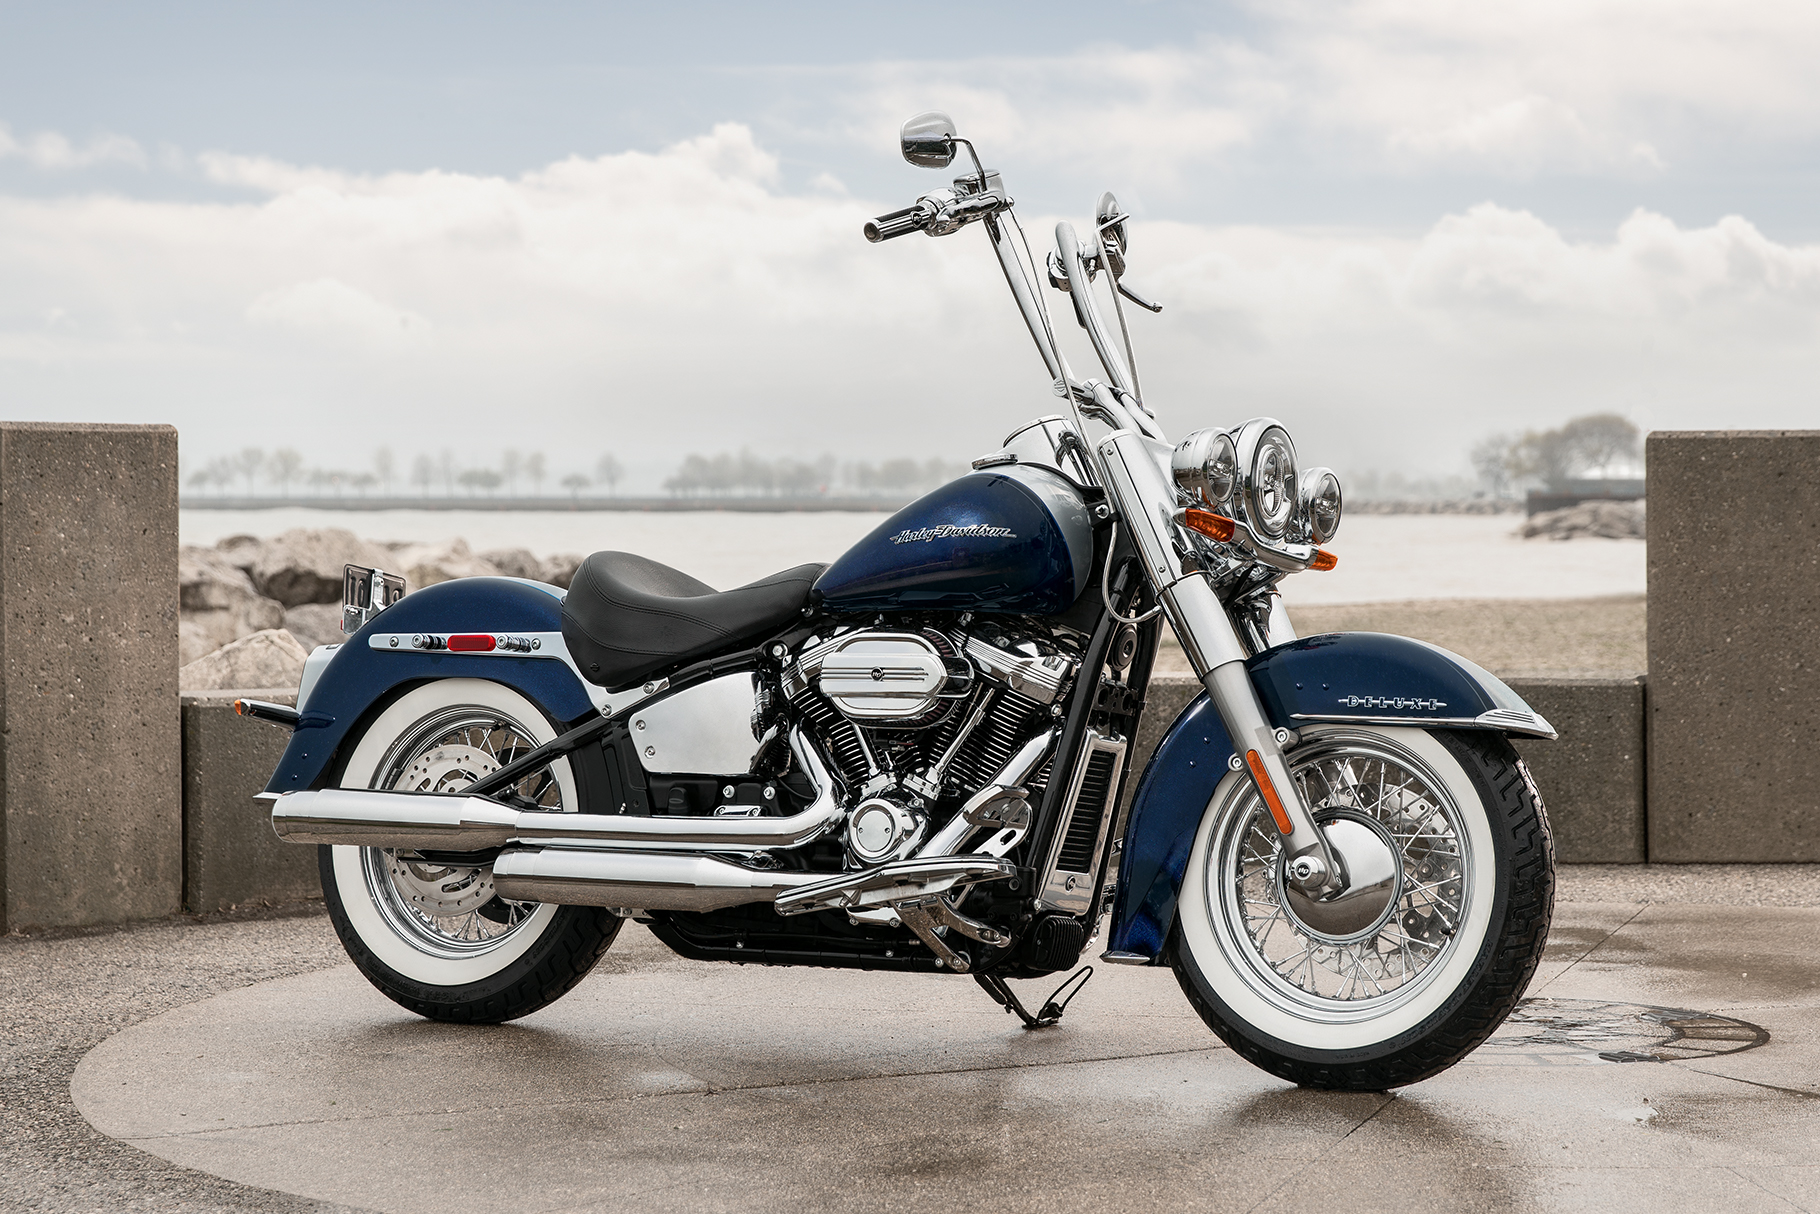  2019  Softail Deluxe Motorcycle Harley  Davidson  USA 